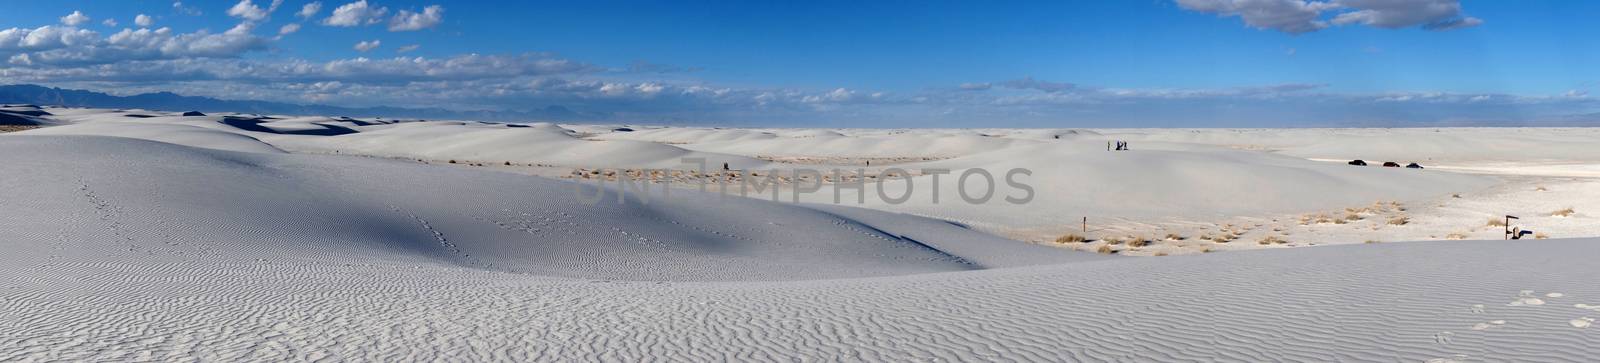 White Sand Dunes on Sunny Day by tang90246